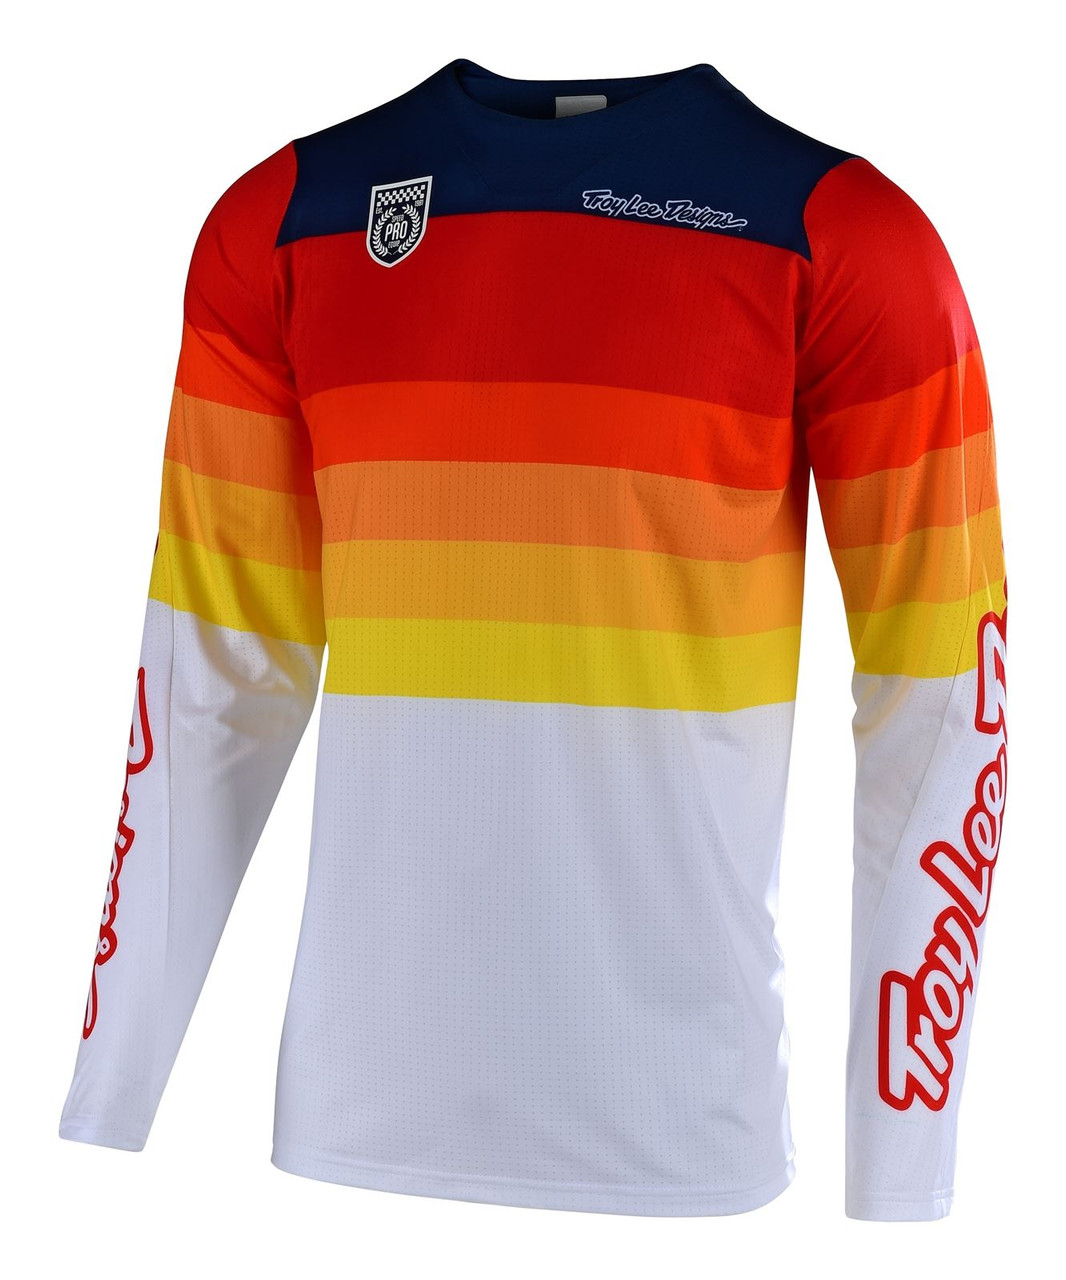 tld jersey 2019